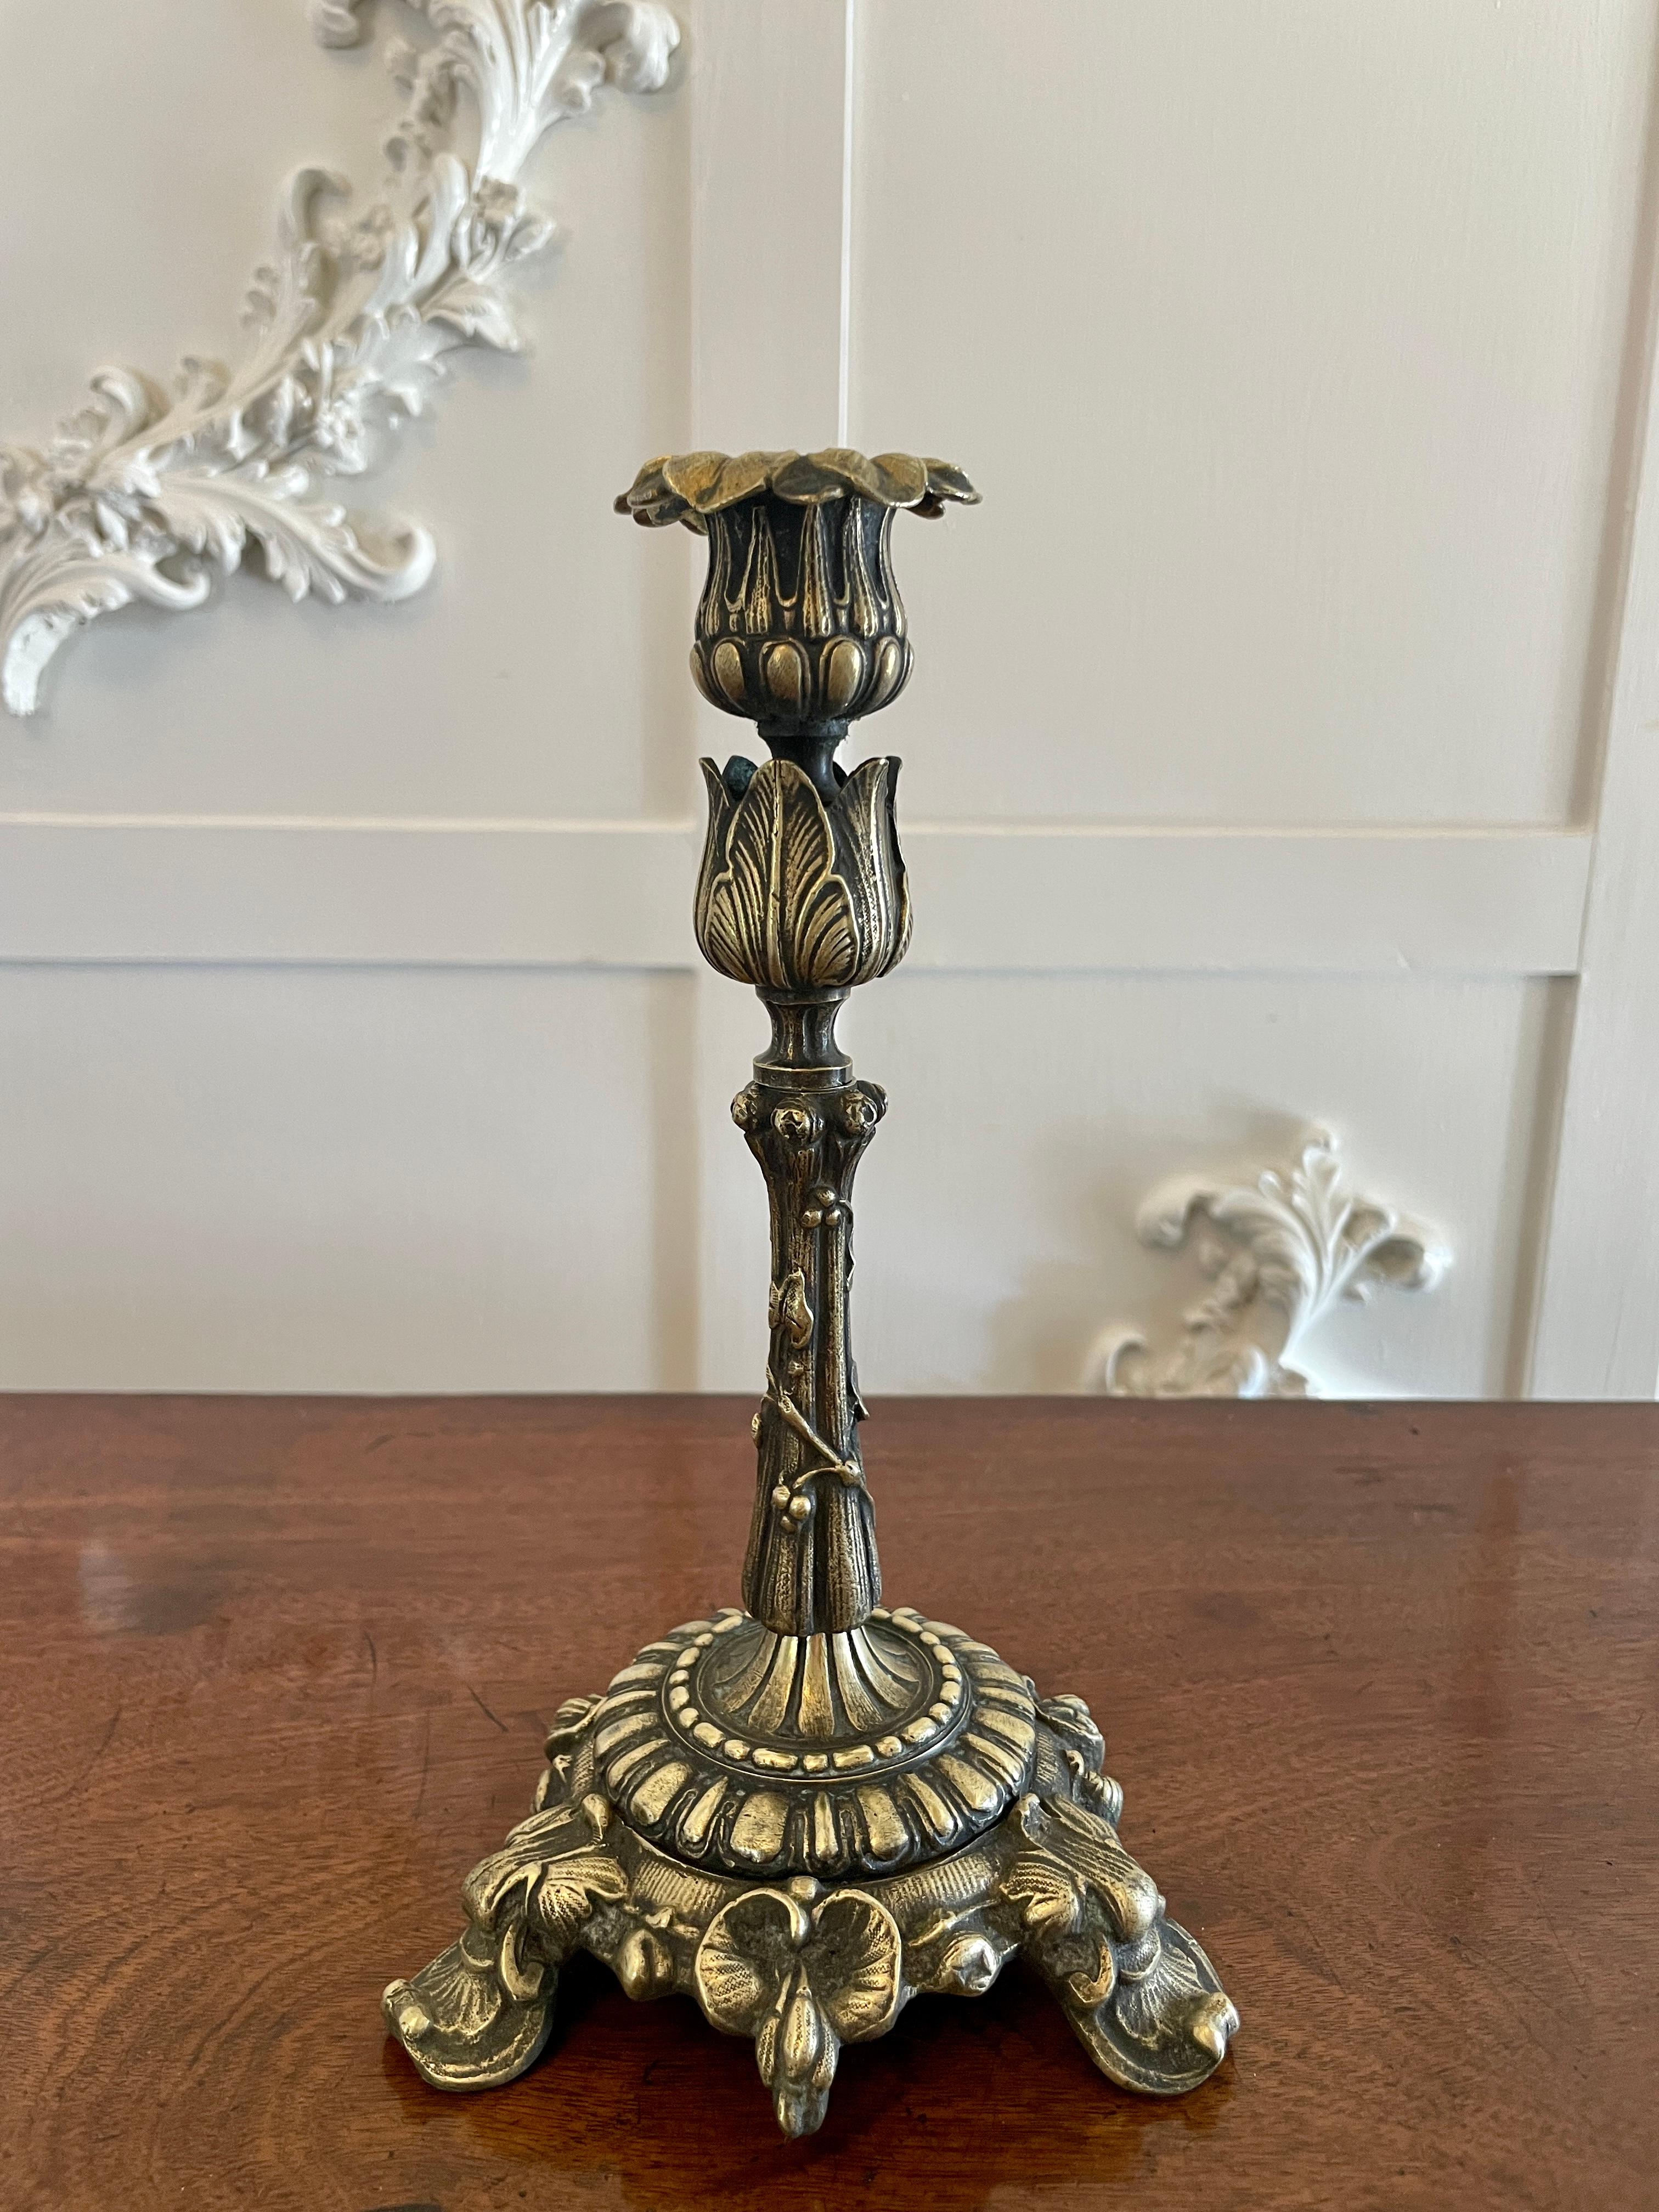 Pair of Antique Regency Quality Ornate Brass Candlesticks For Sale 2